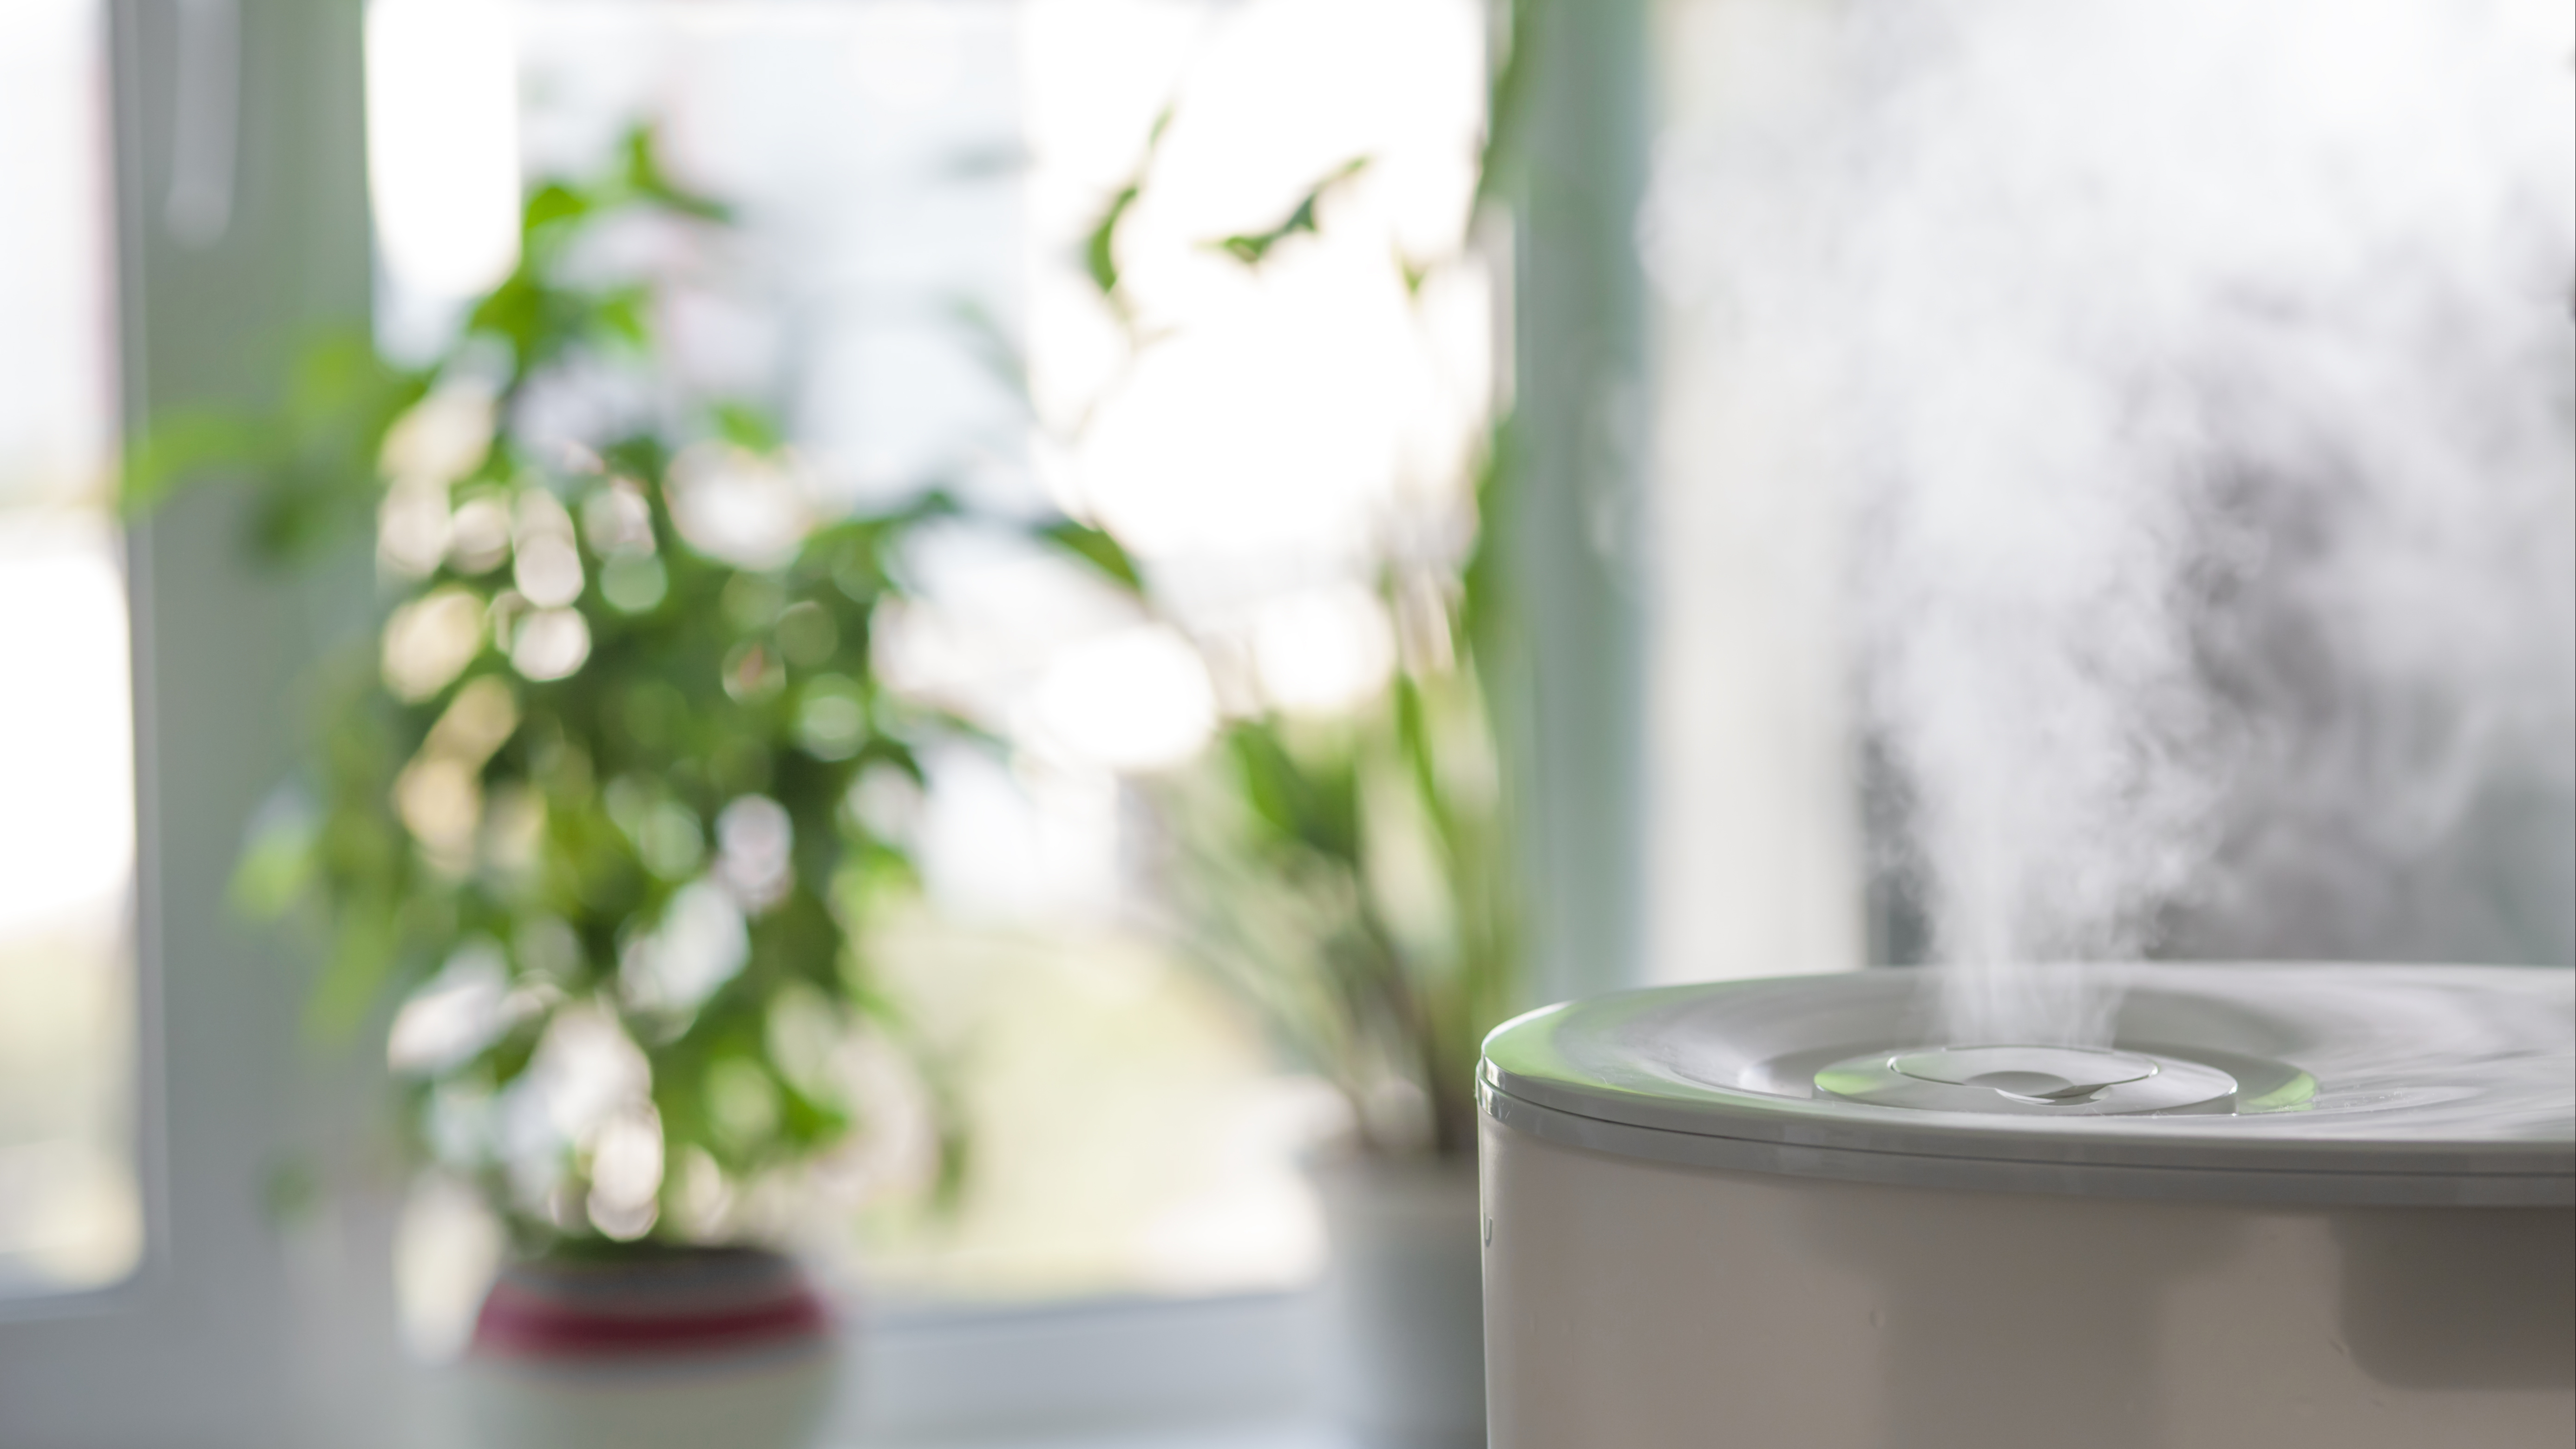 vapor from a humidifier in a bright living room with a window and plants in the background